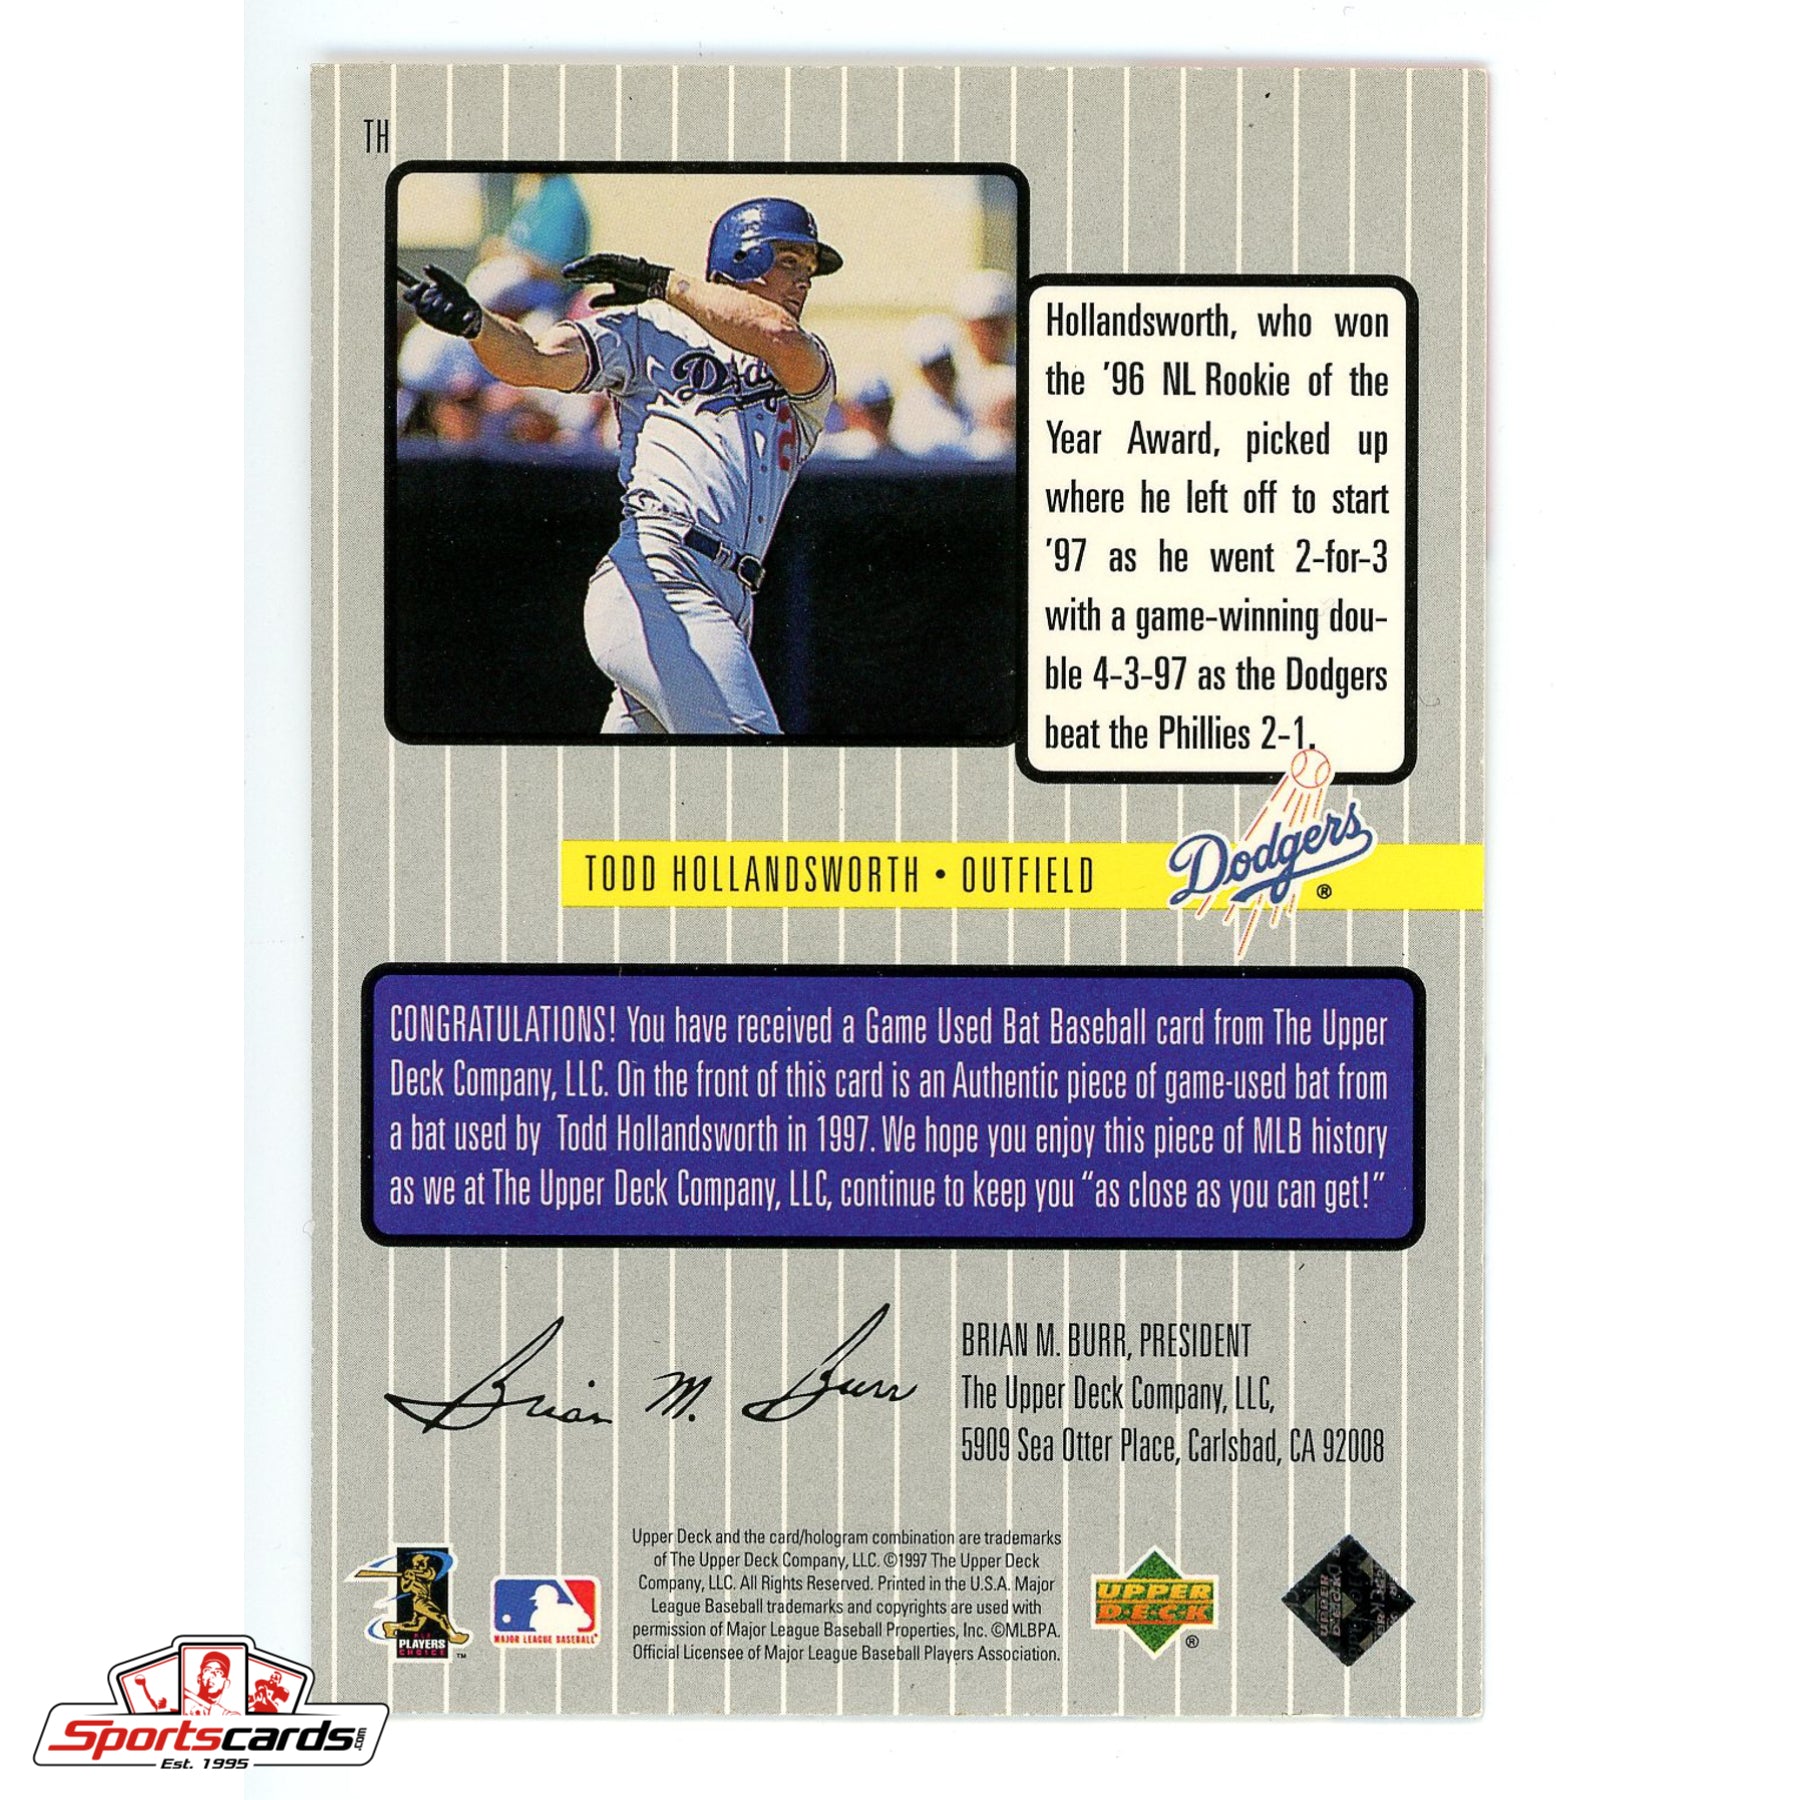 1997 Upper Deck A Piece of the Action Todd Hollandsworth Bat Card